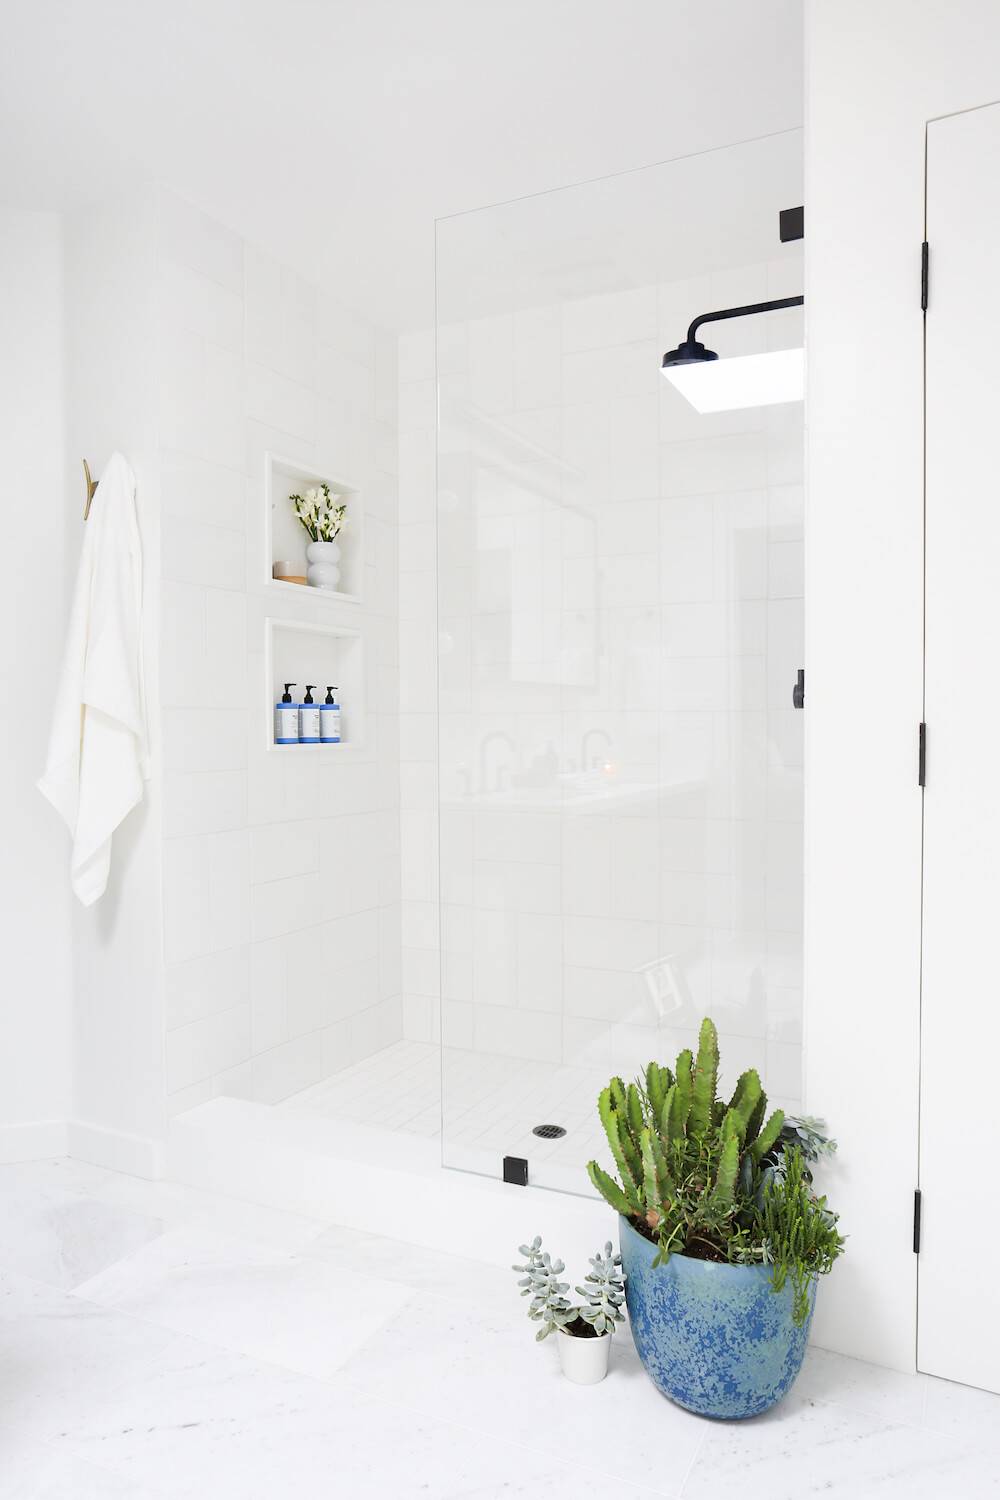 A white shower with a white towel hanging on the wall and two plants, one in a blue planter and one in a tiny white planter next to the shower.